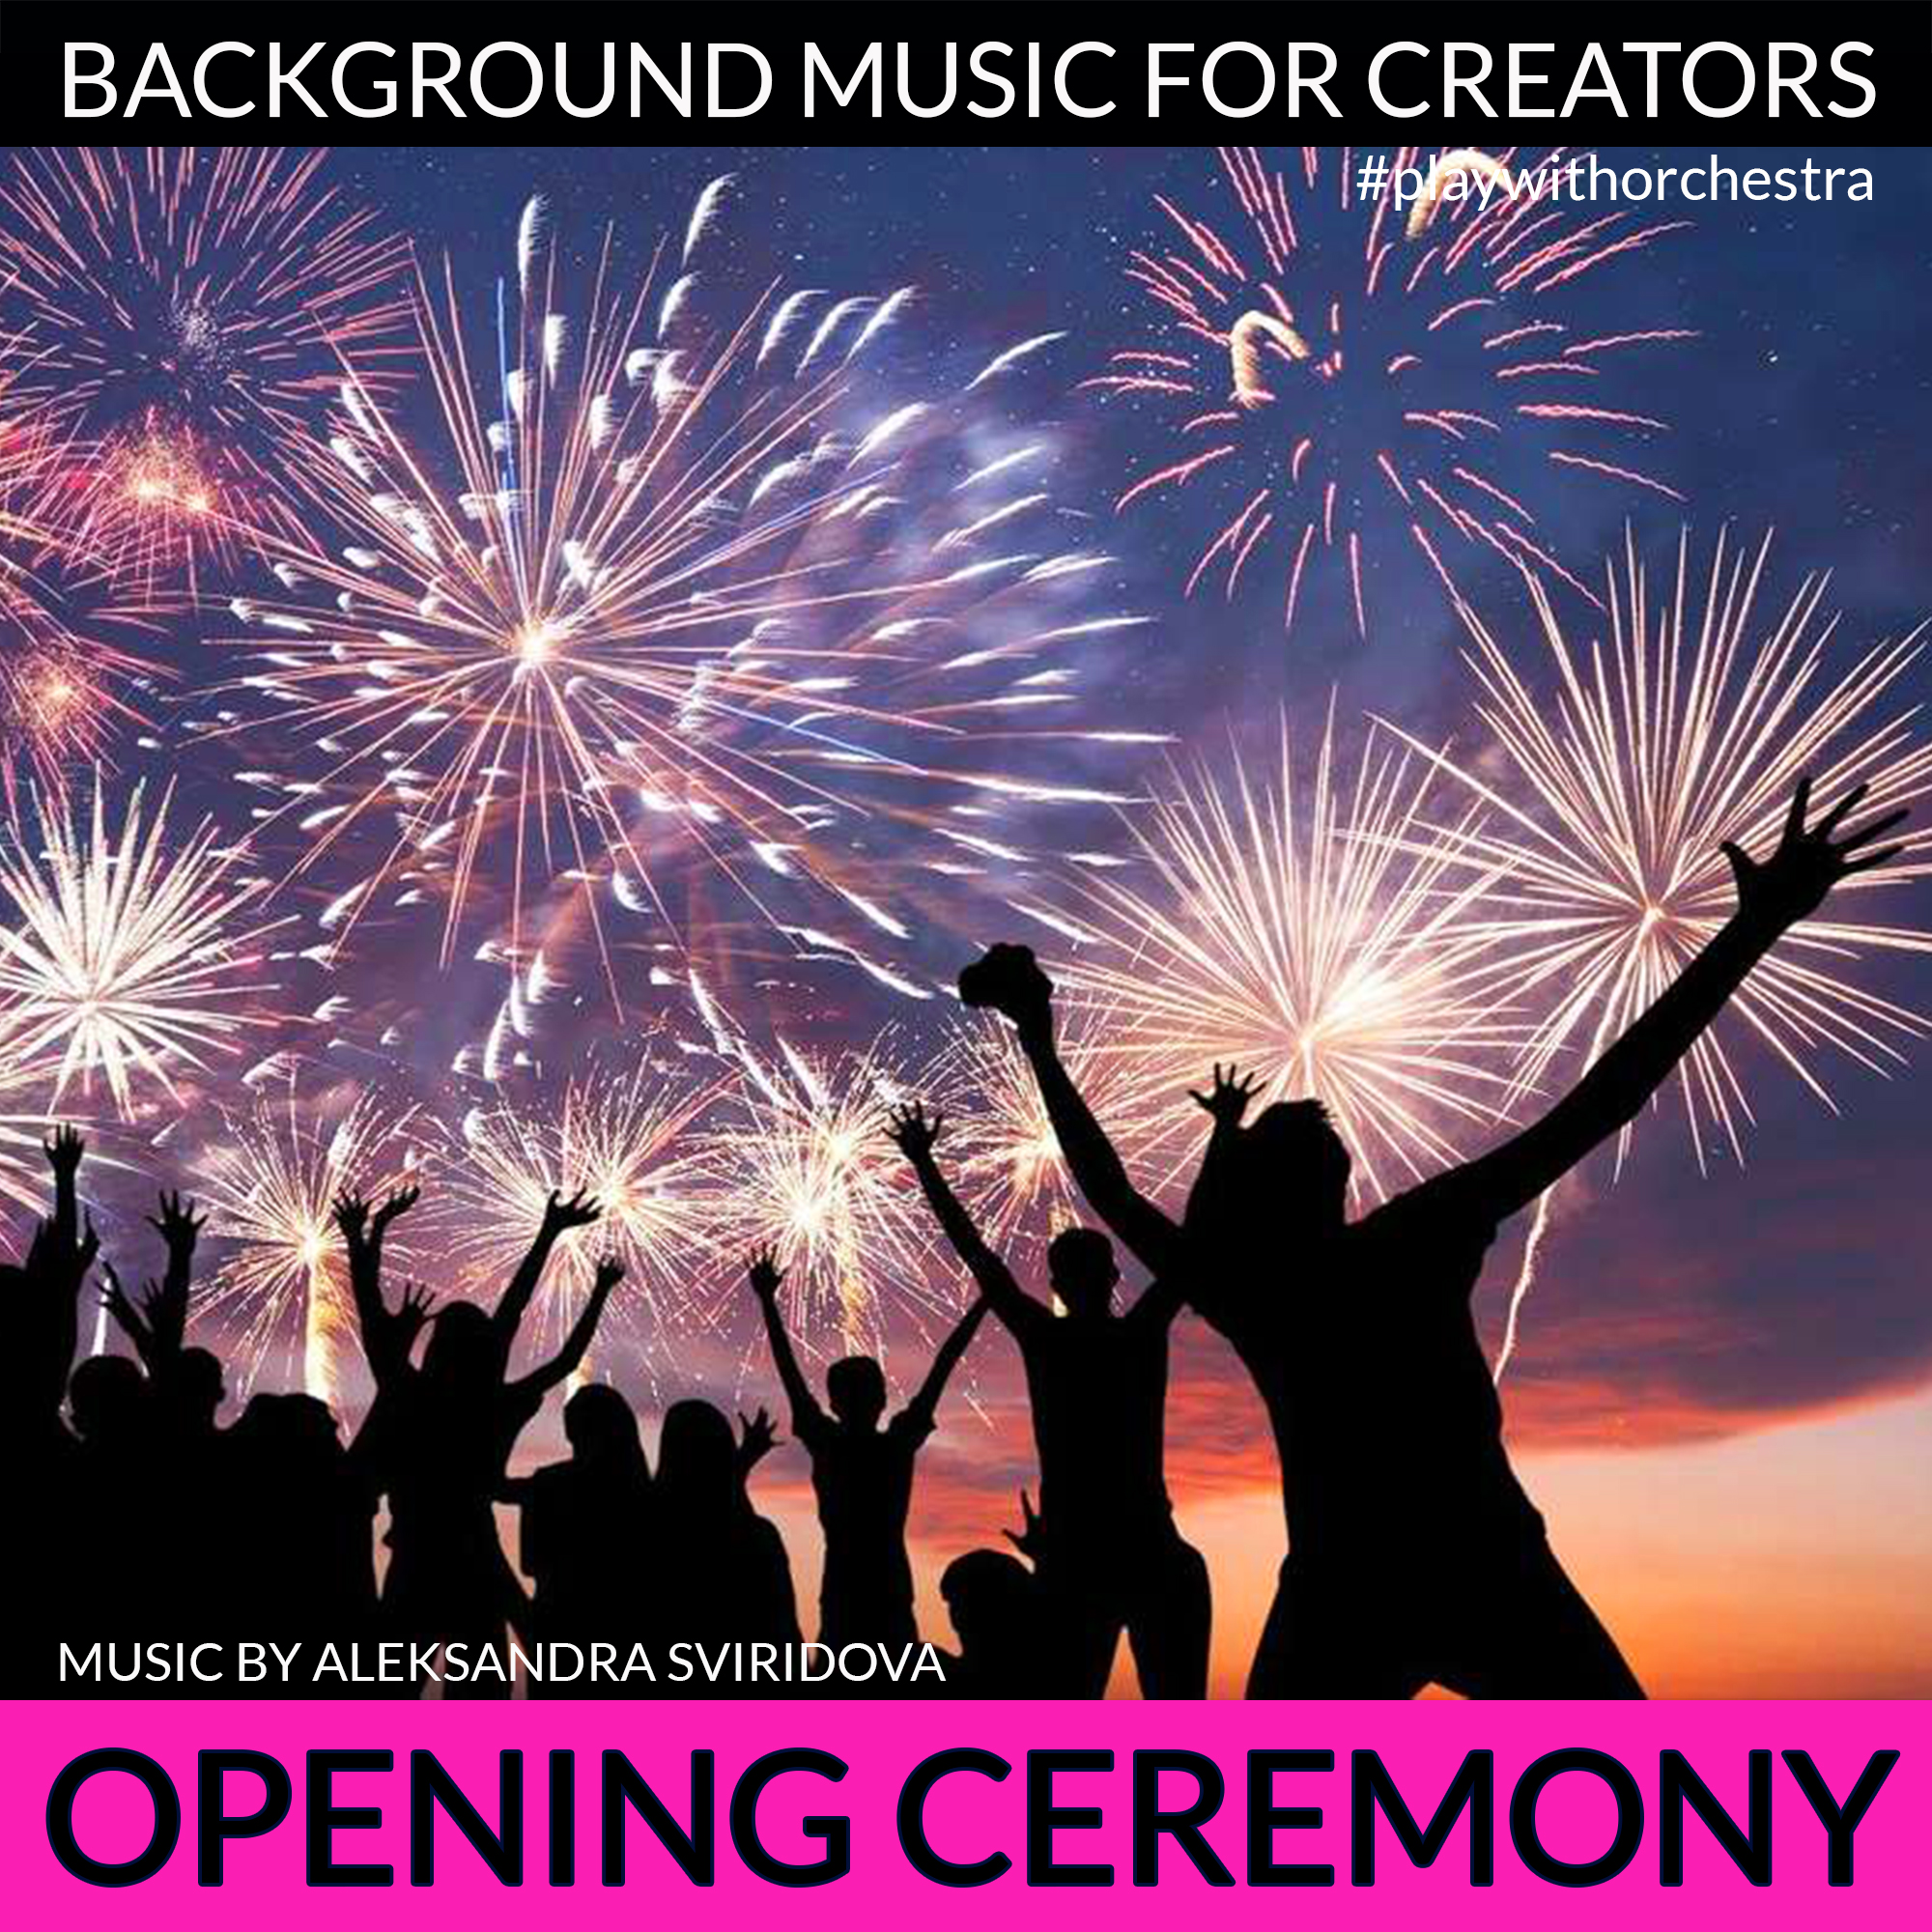 Awards Music No Copyright | Royalty Free Ceremony Music FREE Download -  Play with Orchestra